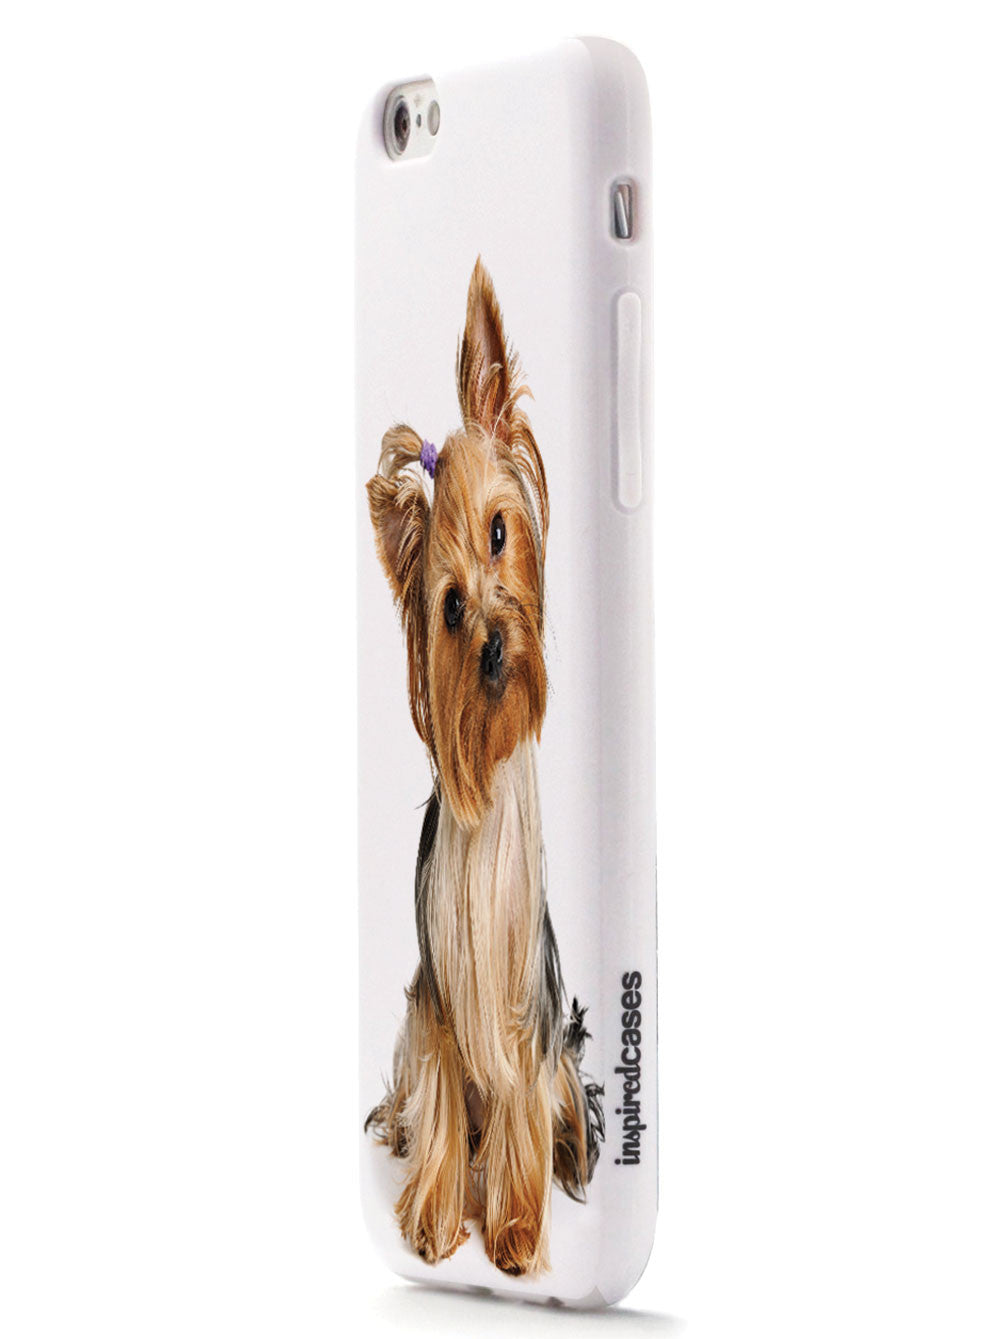 Yorkshire Terrier with Bow Case